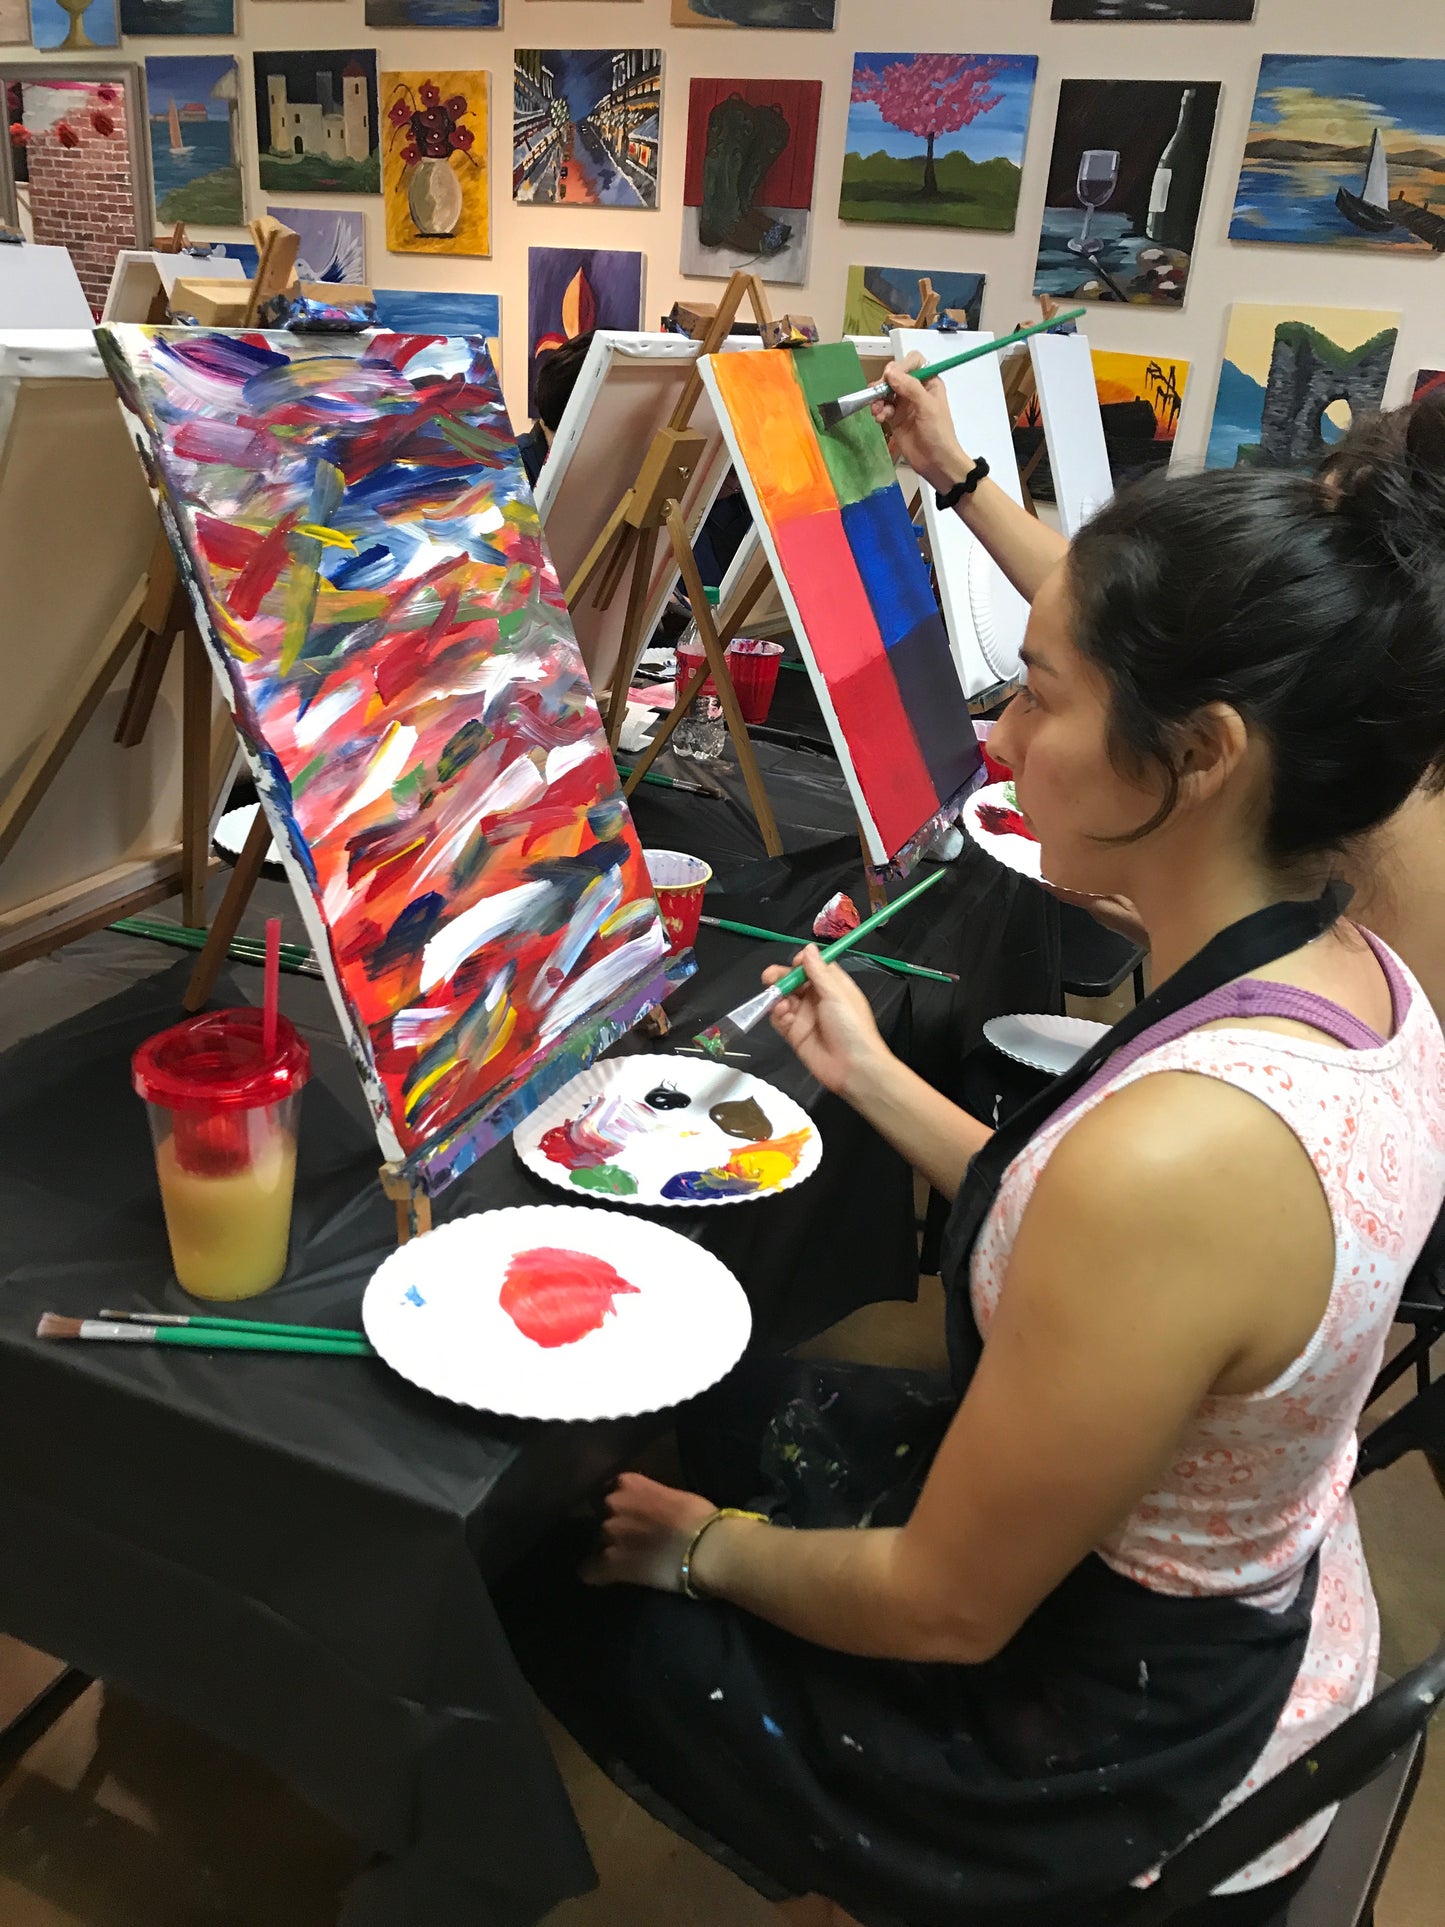 Wed, Nov 14, 9a-12pm Slow Flow Mojo Public Houston Yoga and Paint Class